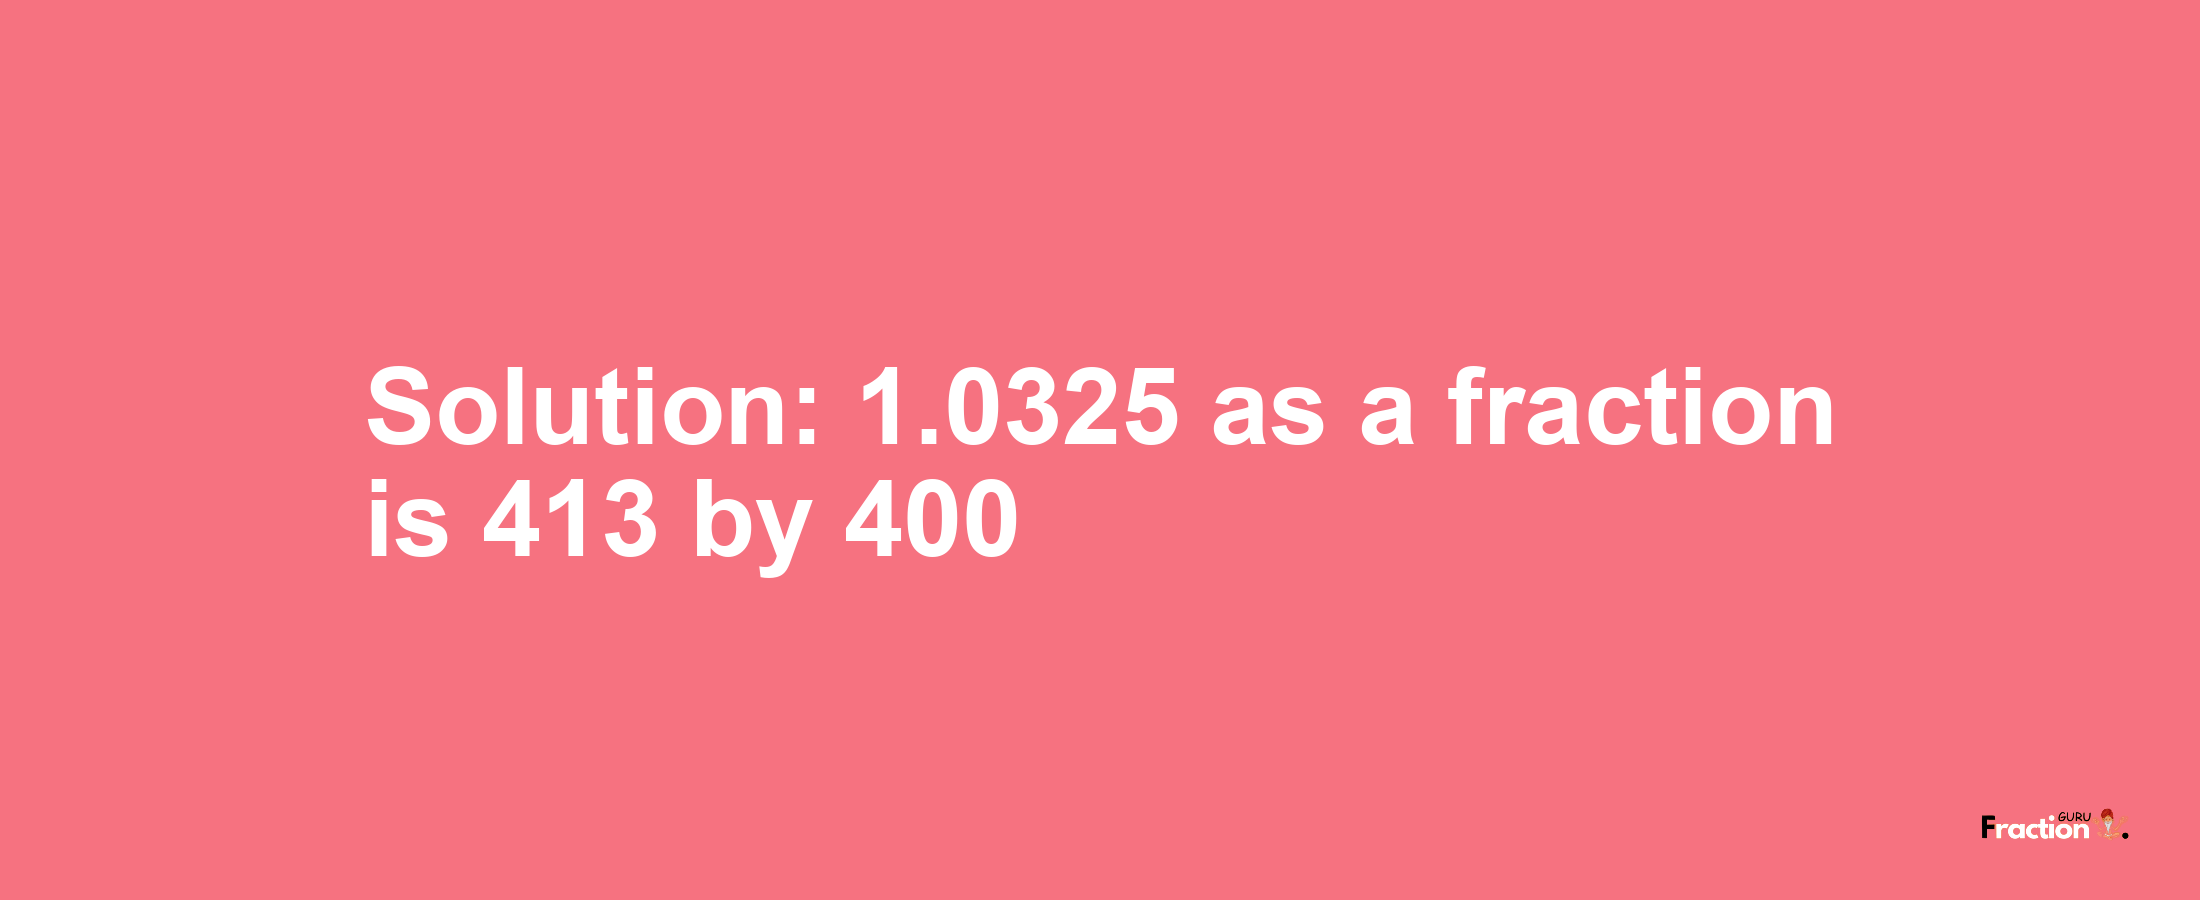 Solution:1.0325 as a fraction is 413/400